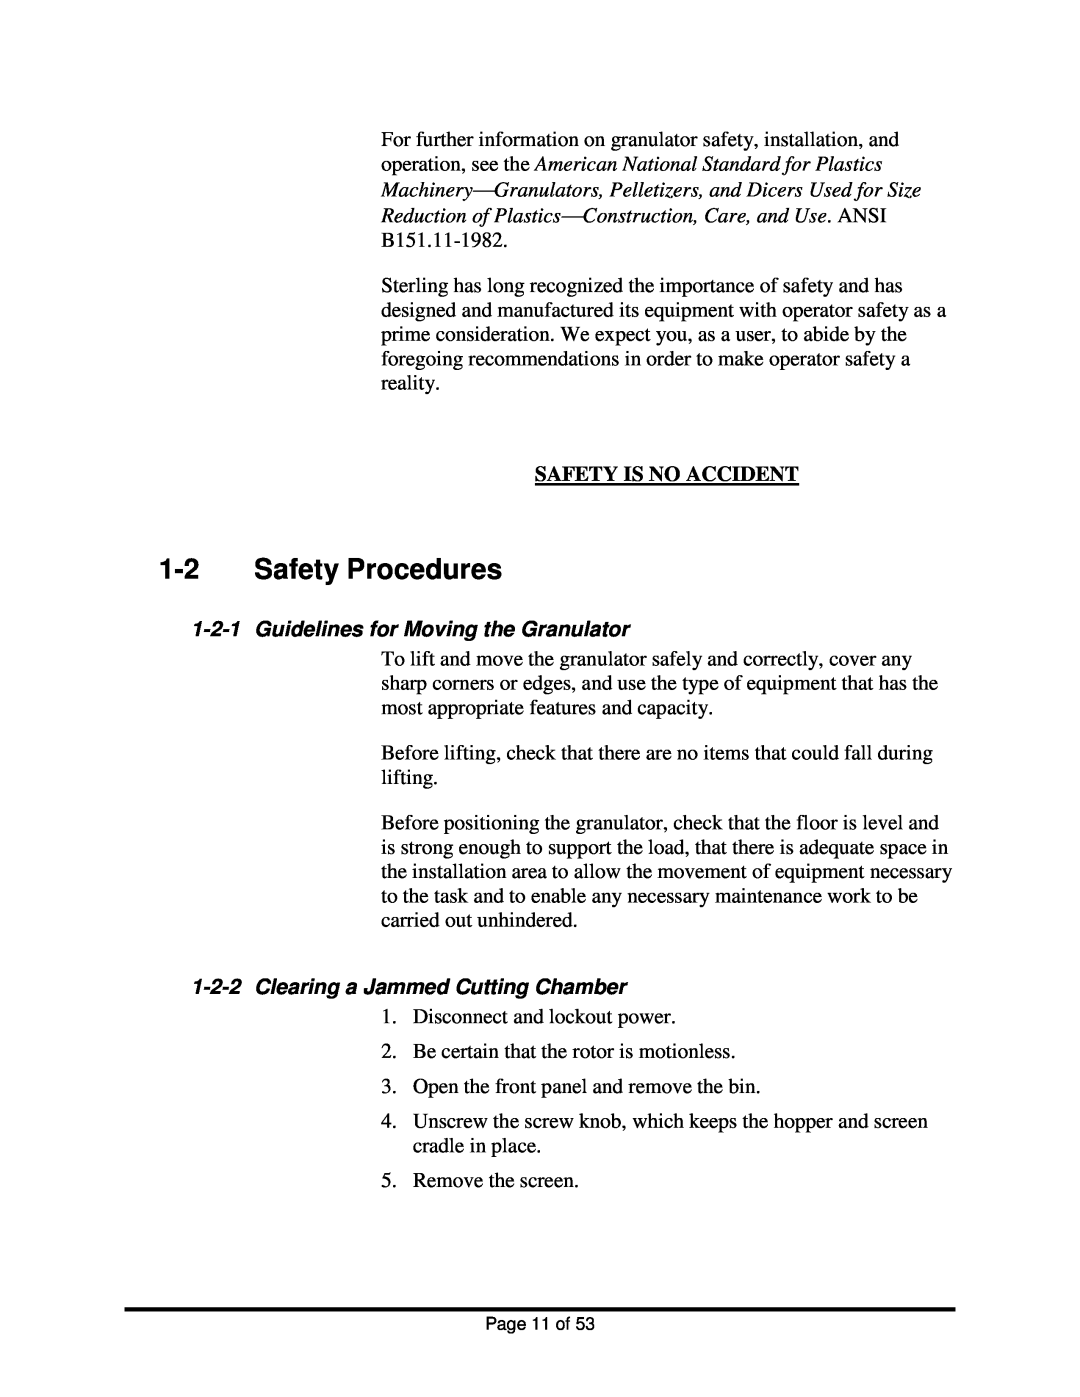 Sterling BP1012, BP1018 1-2Safety Procedures, Safety Is No Accident, 1-2-1Guidelines for Moving the Granulator 